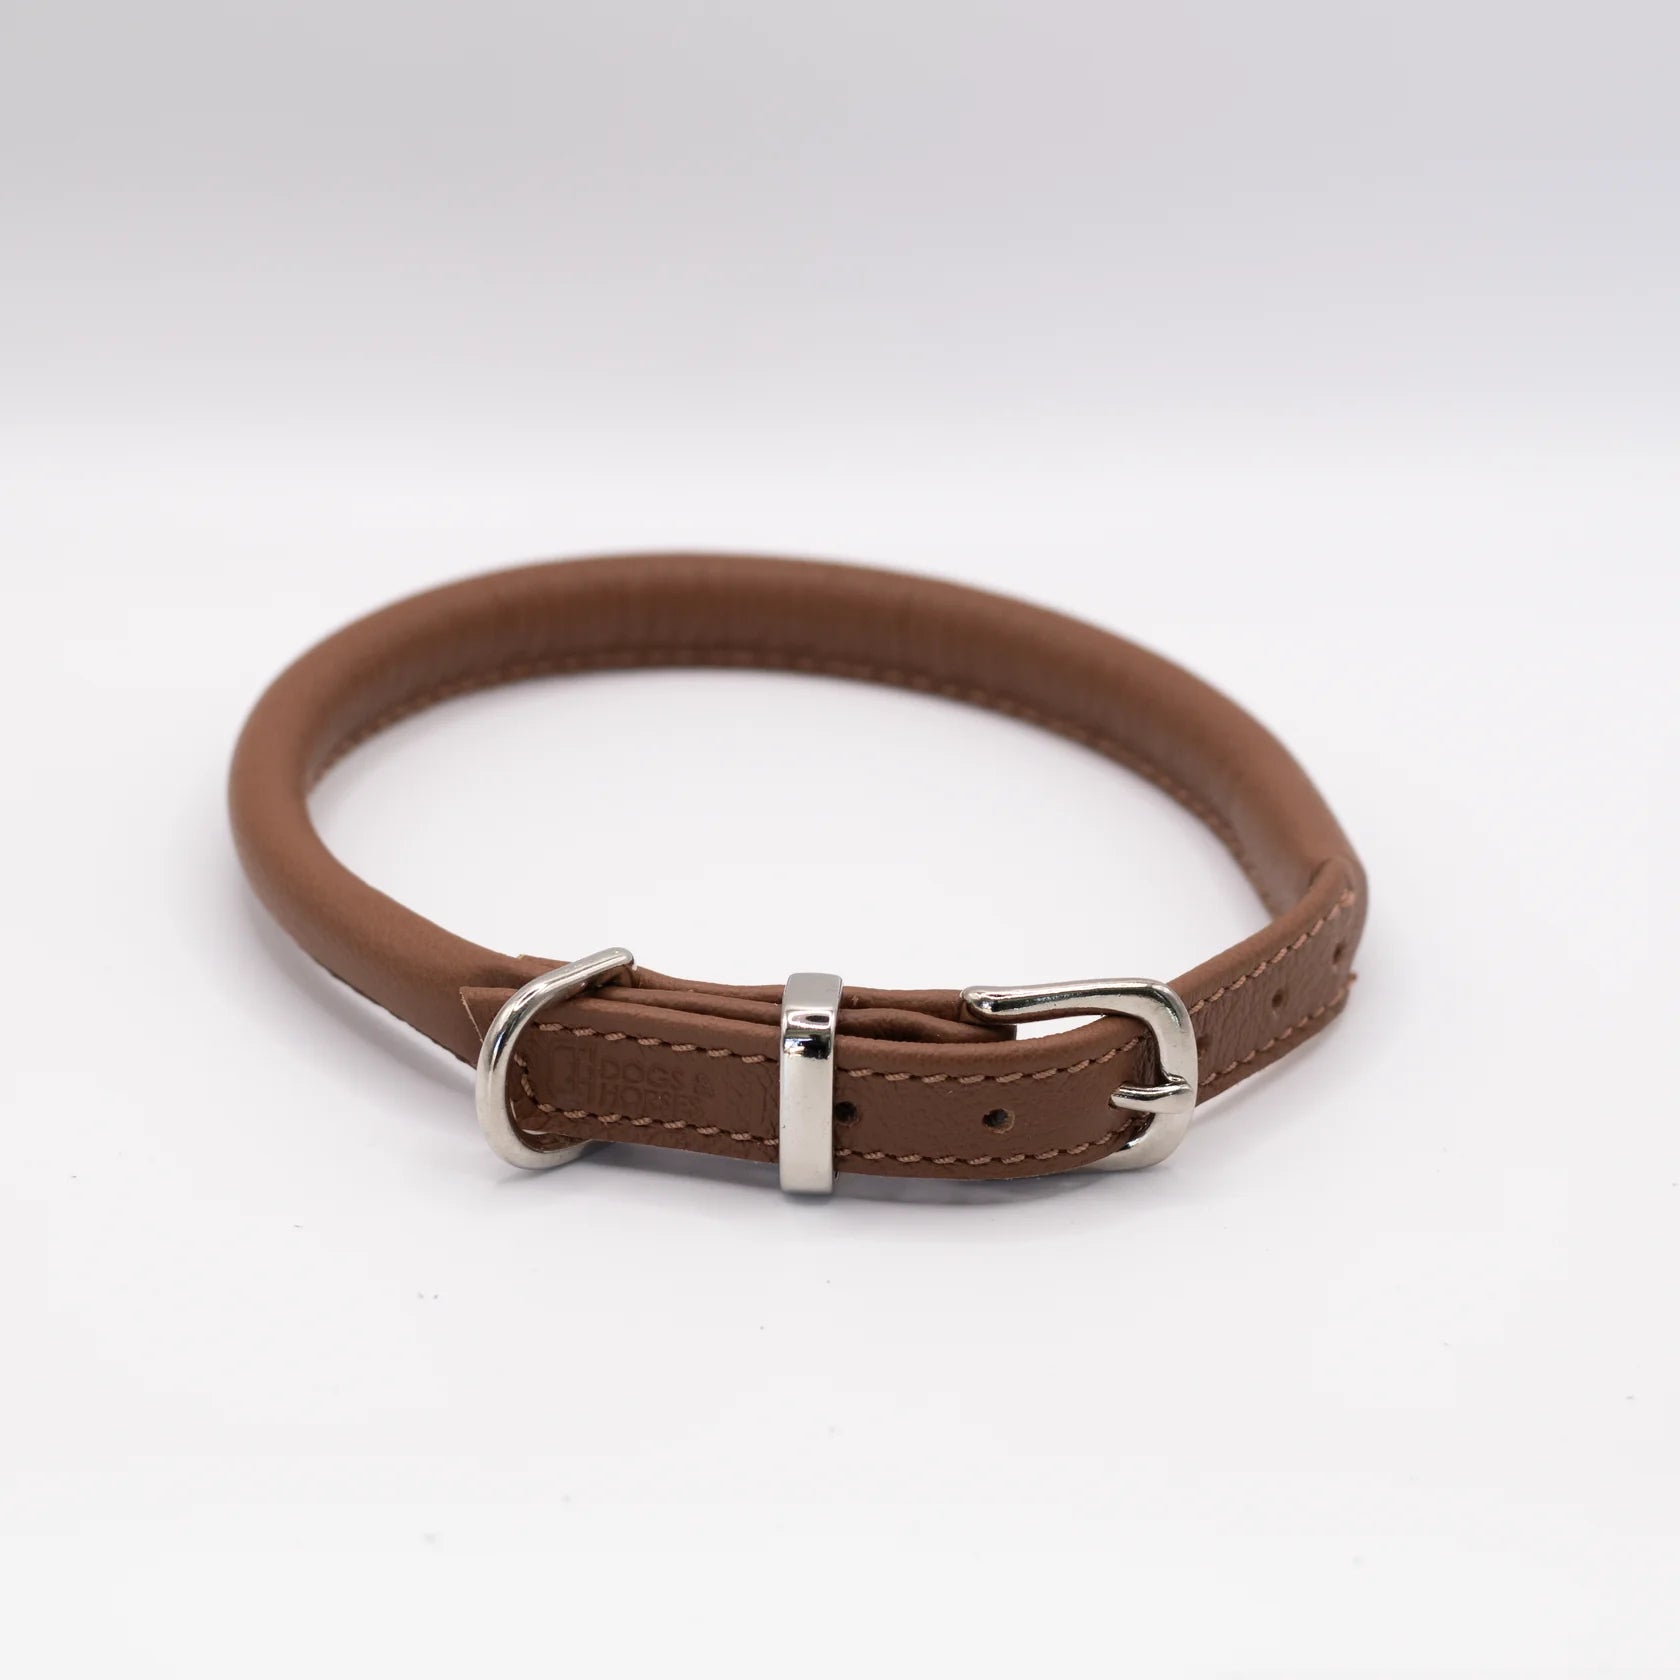 Dogs and Horse Tan Leather Rolled Collar